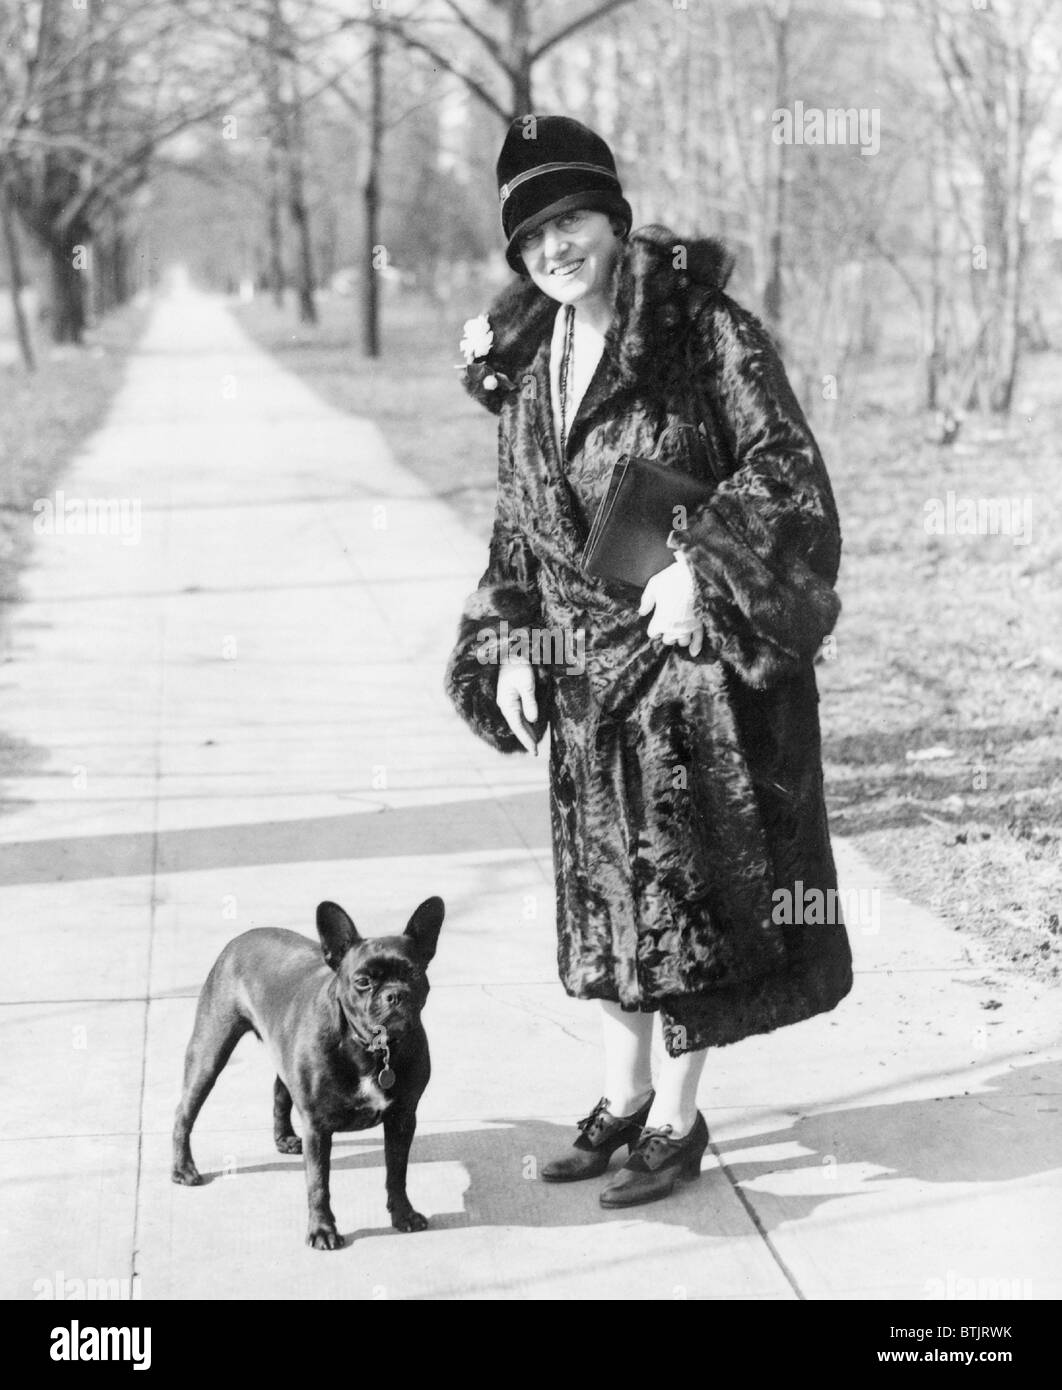 Mary Roberts Rinehart, (1876-1858), popular American novelist and playwright of mystery tales, whose career spanned over 40 years. Press photo snapped while out for a stroll with her favorite pet. Stock Photo